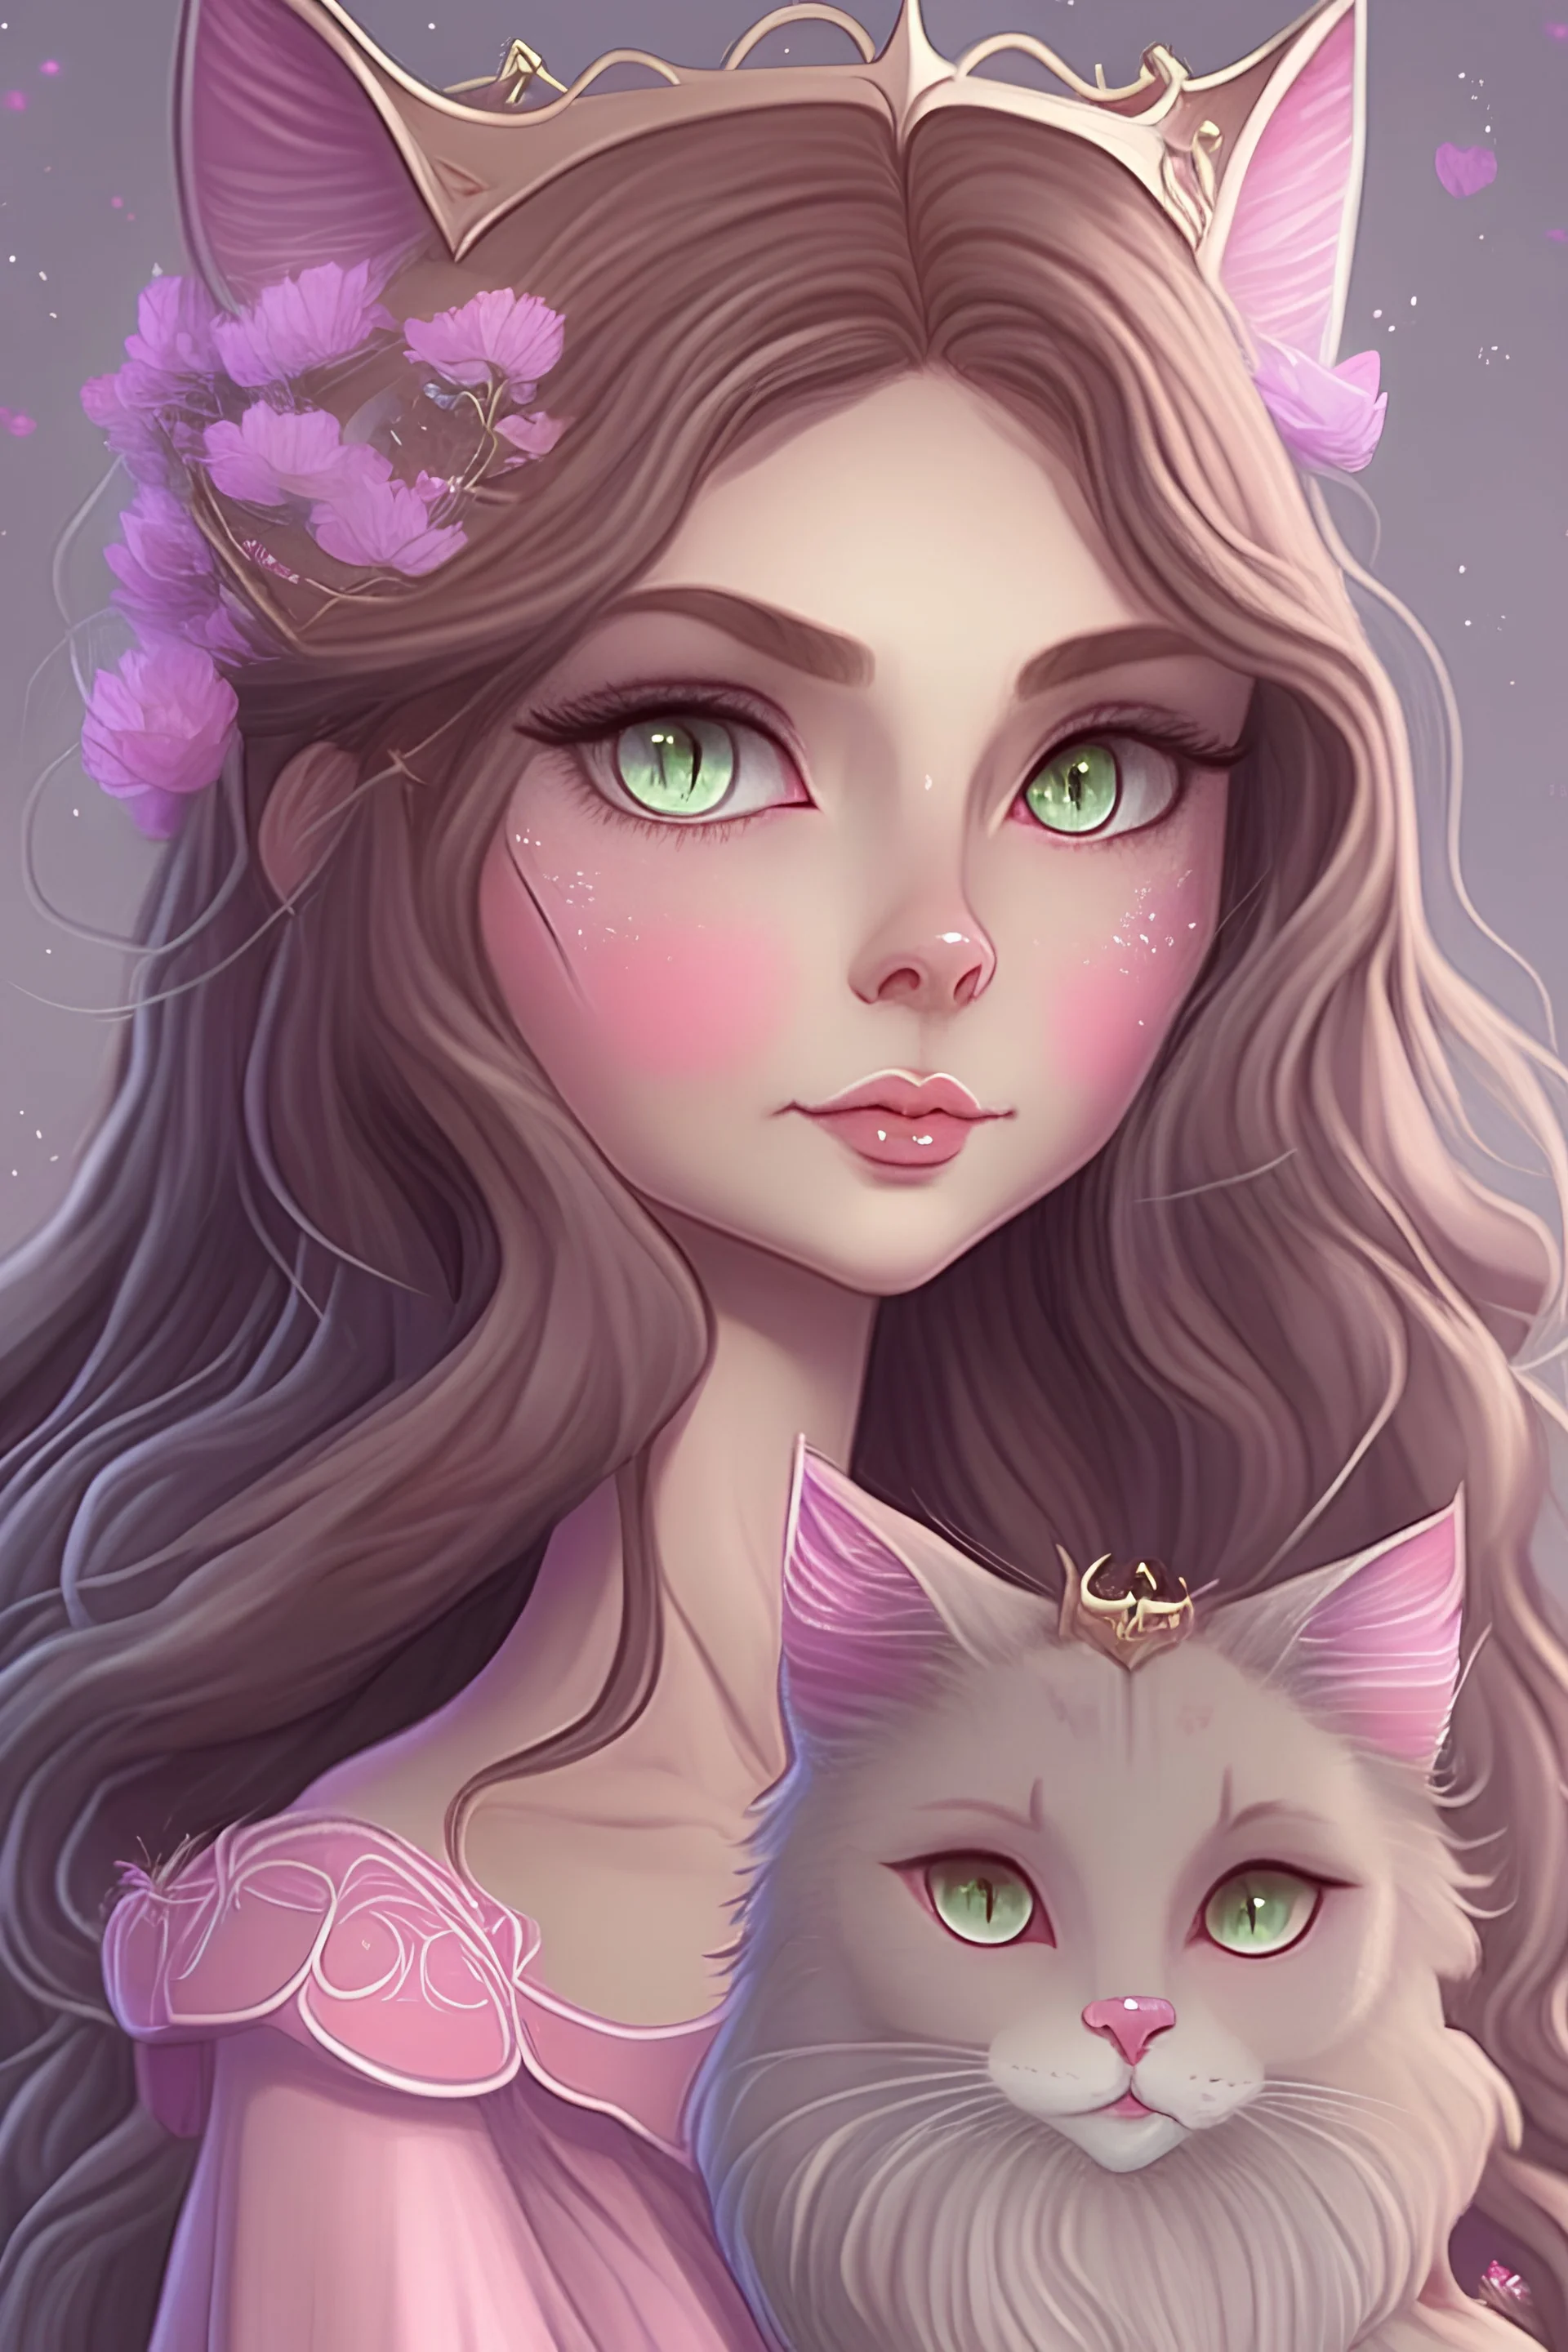 Beautiful and fairy queen from solaria light brown hair and grey ocean eyes wearing pink holding her grey cat studio ghibli animation style